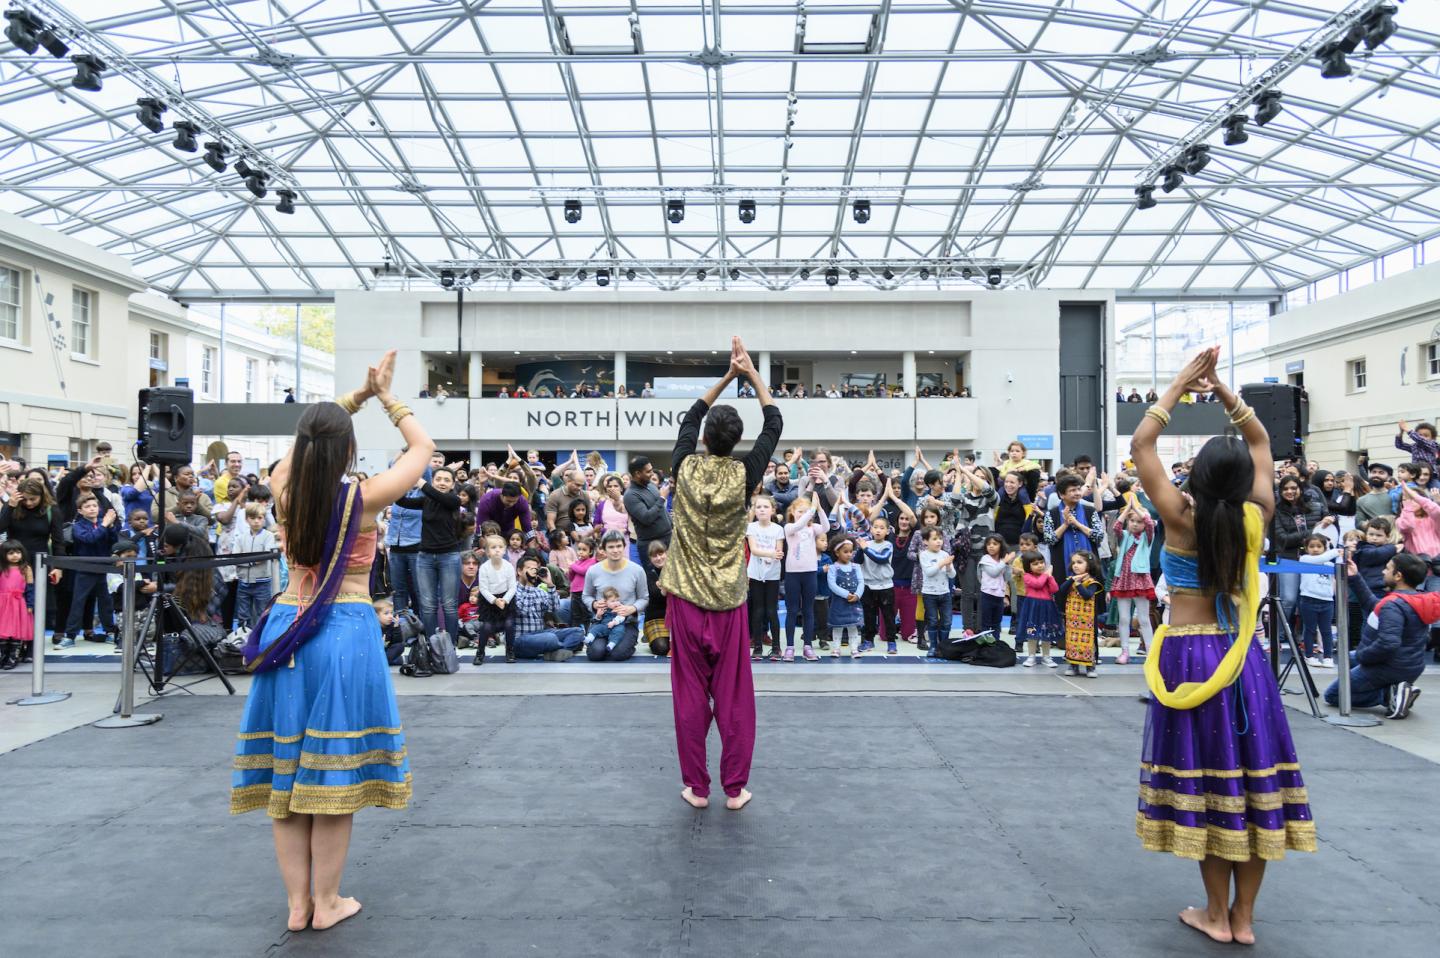 Three dancers perform under the glass dome of the National Maritime Museum in front of a crowd as part of Diwali celebrations